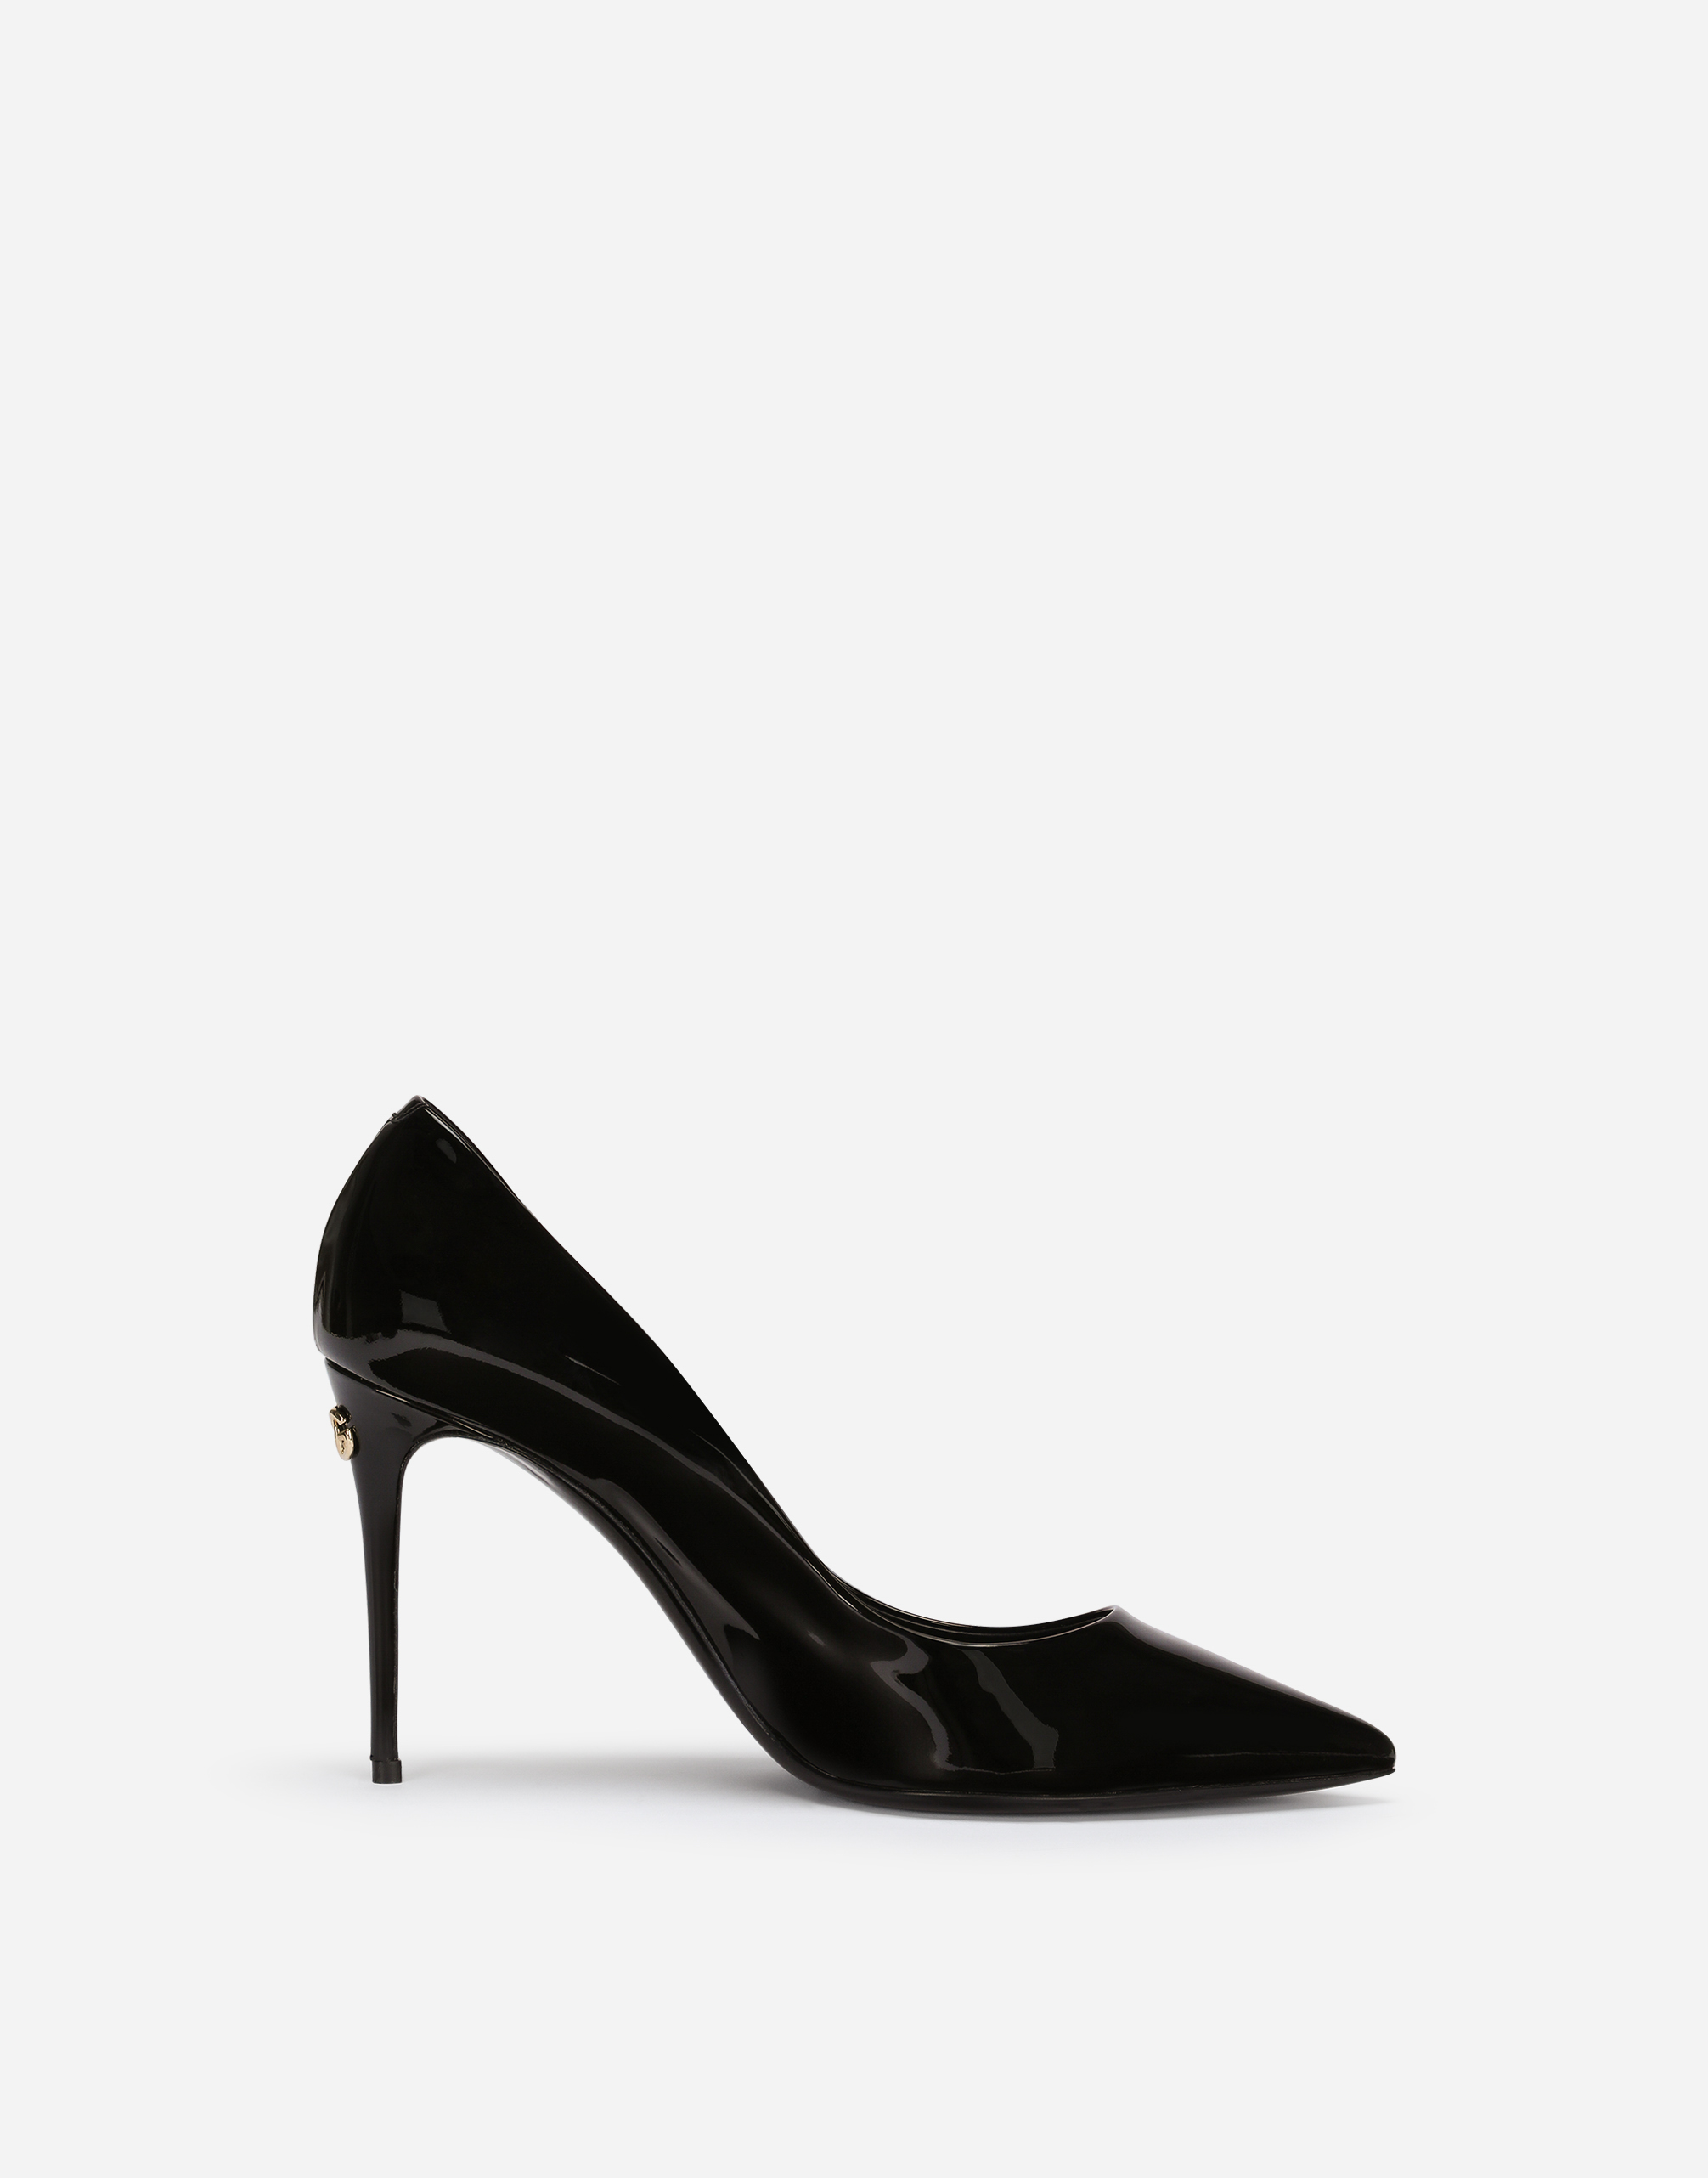 Patent leather Cardinale pumps in Black